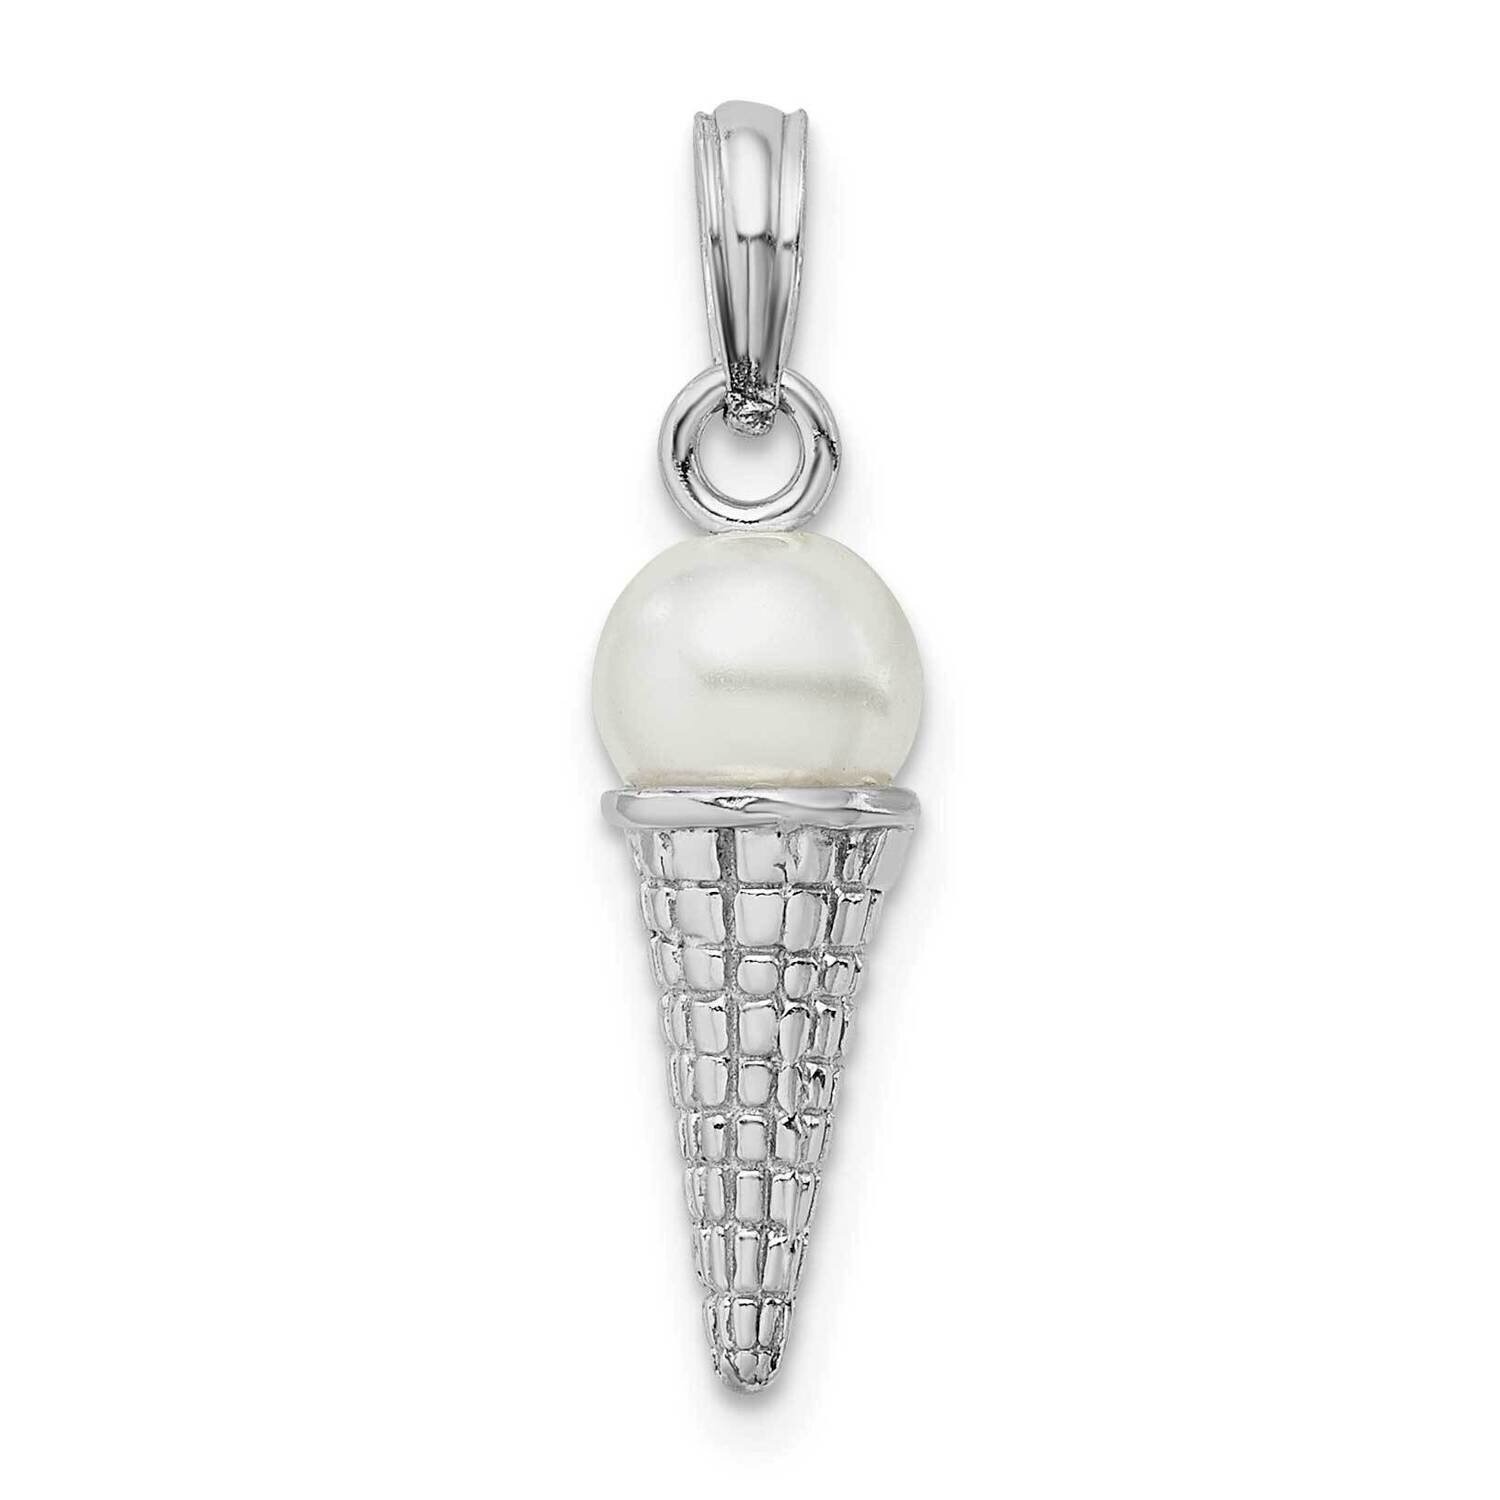 3D White Bead Ice Cream Cone Pendant Sterling Silver Polished QC9900